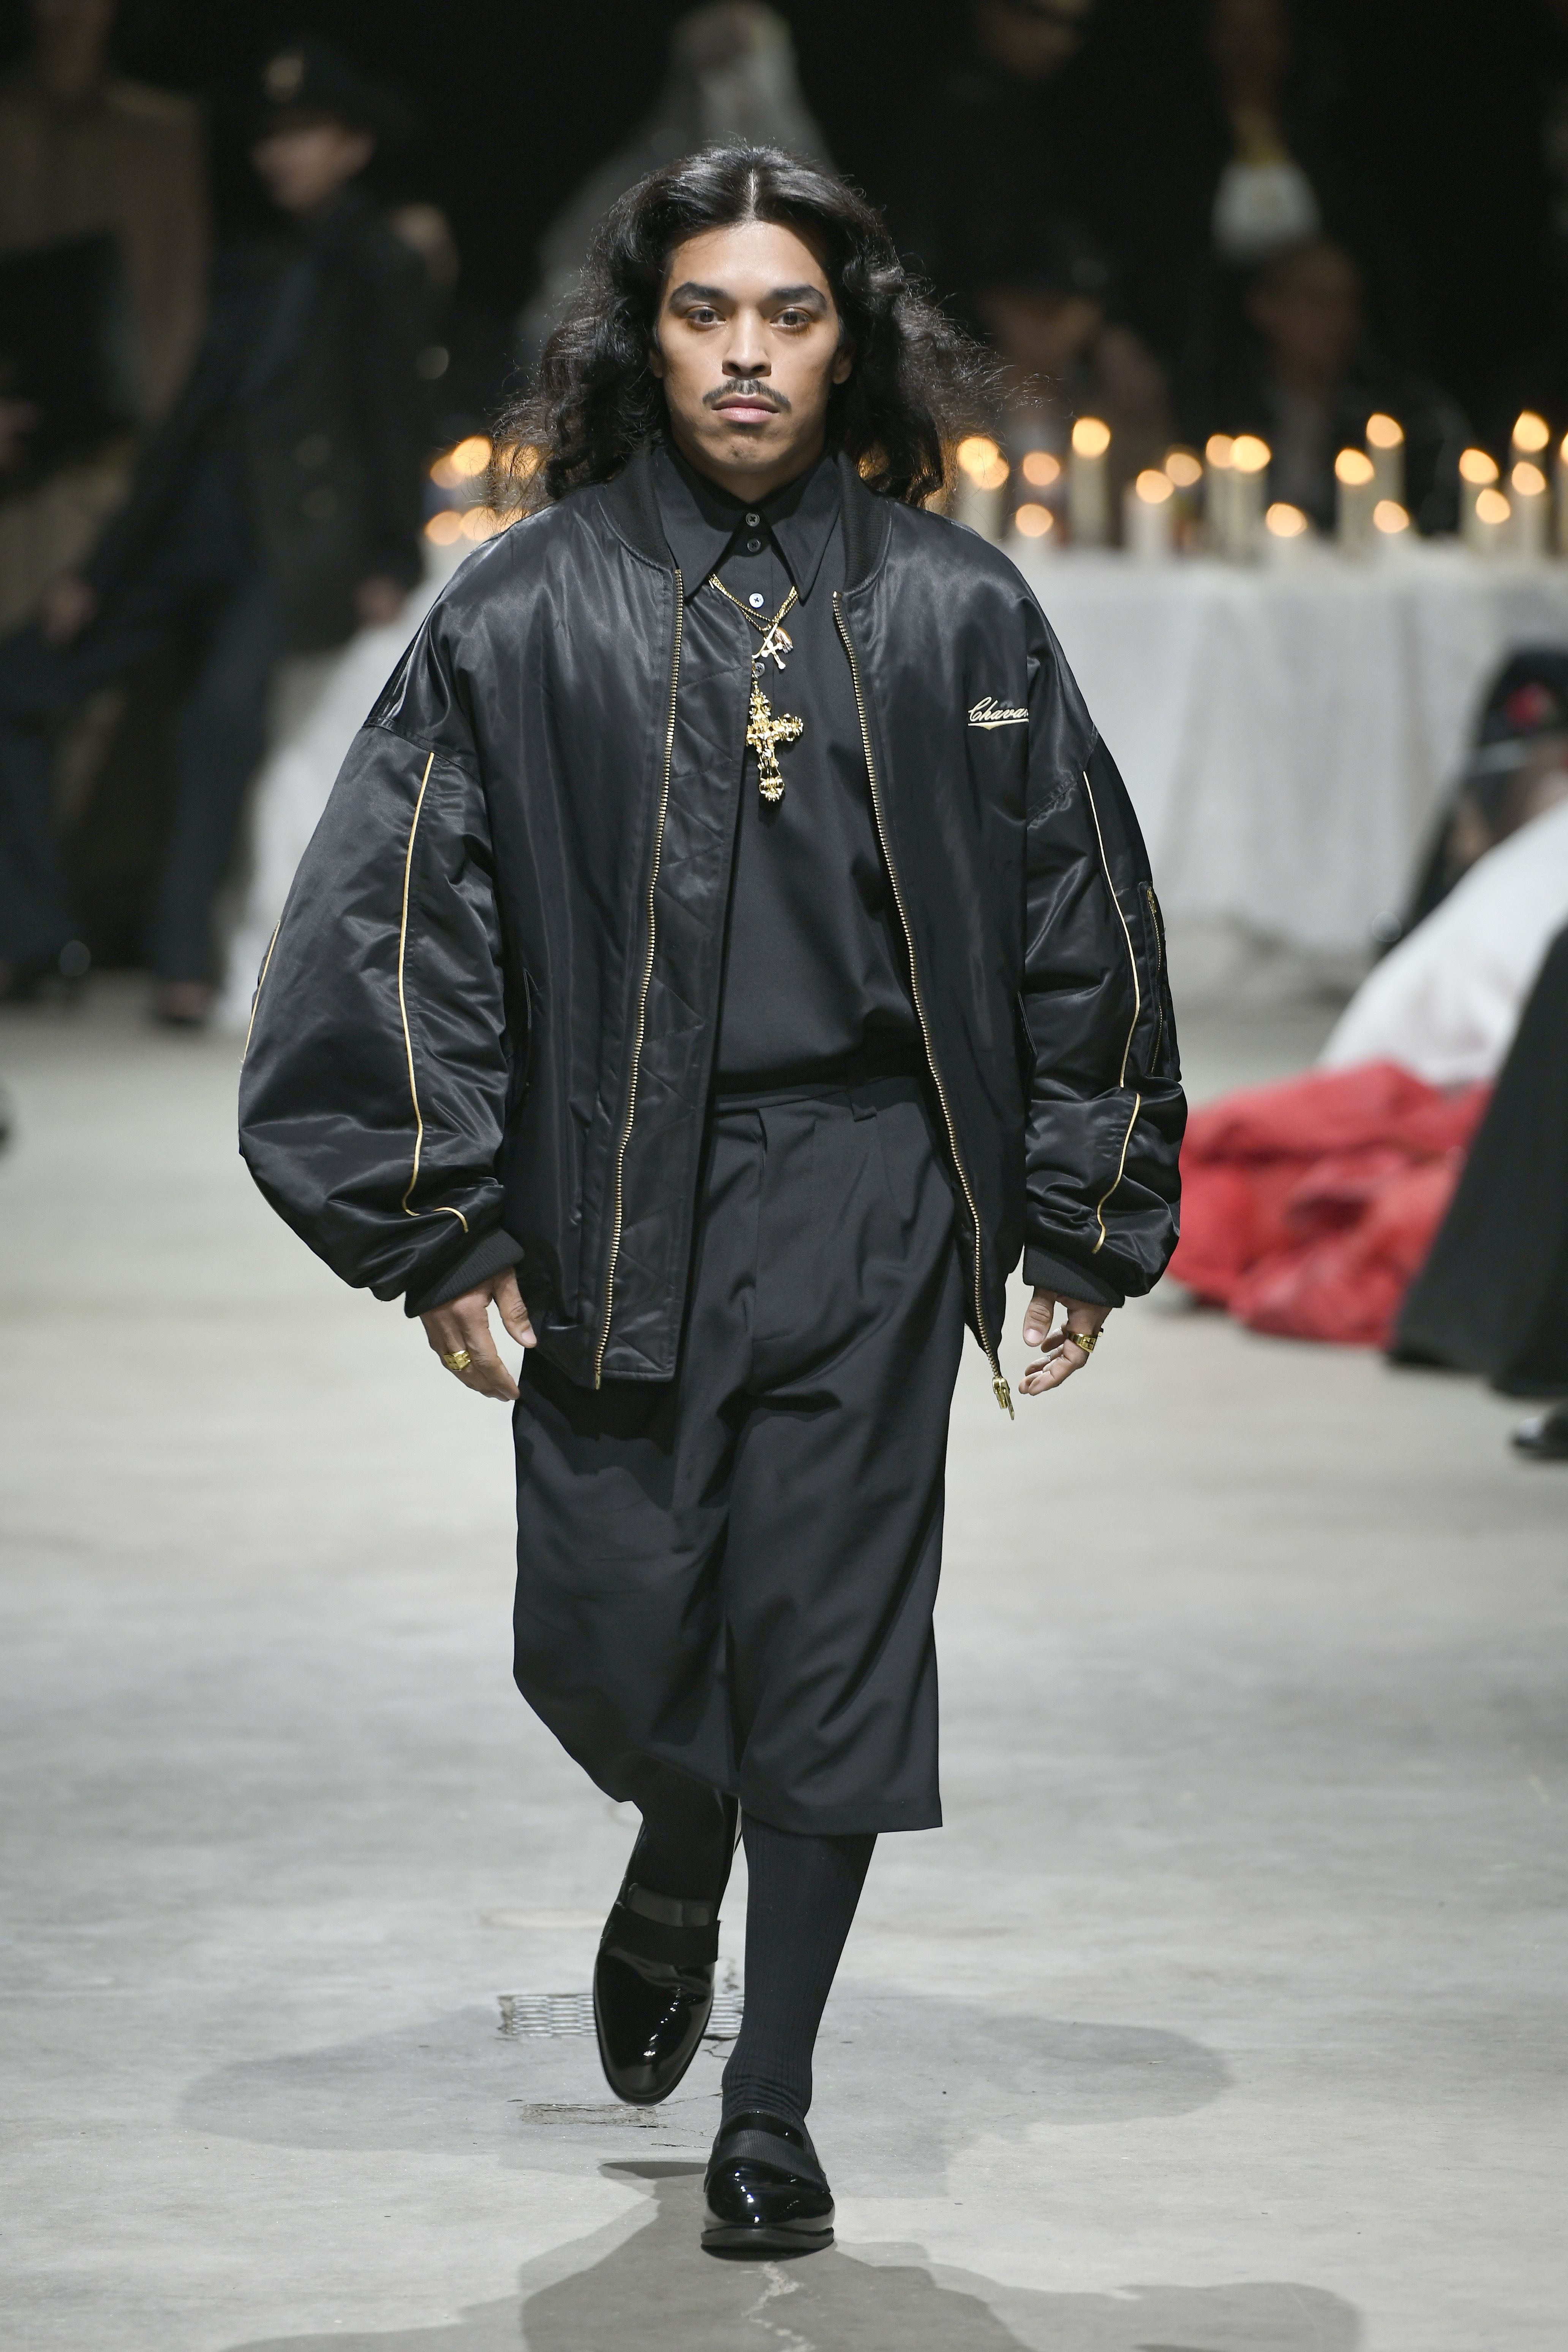 Baggy bomber jackets and 1980s-inspired leather jackets were among the outerwear offerings.